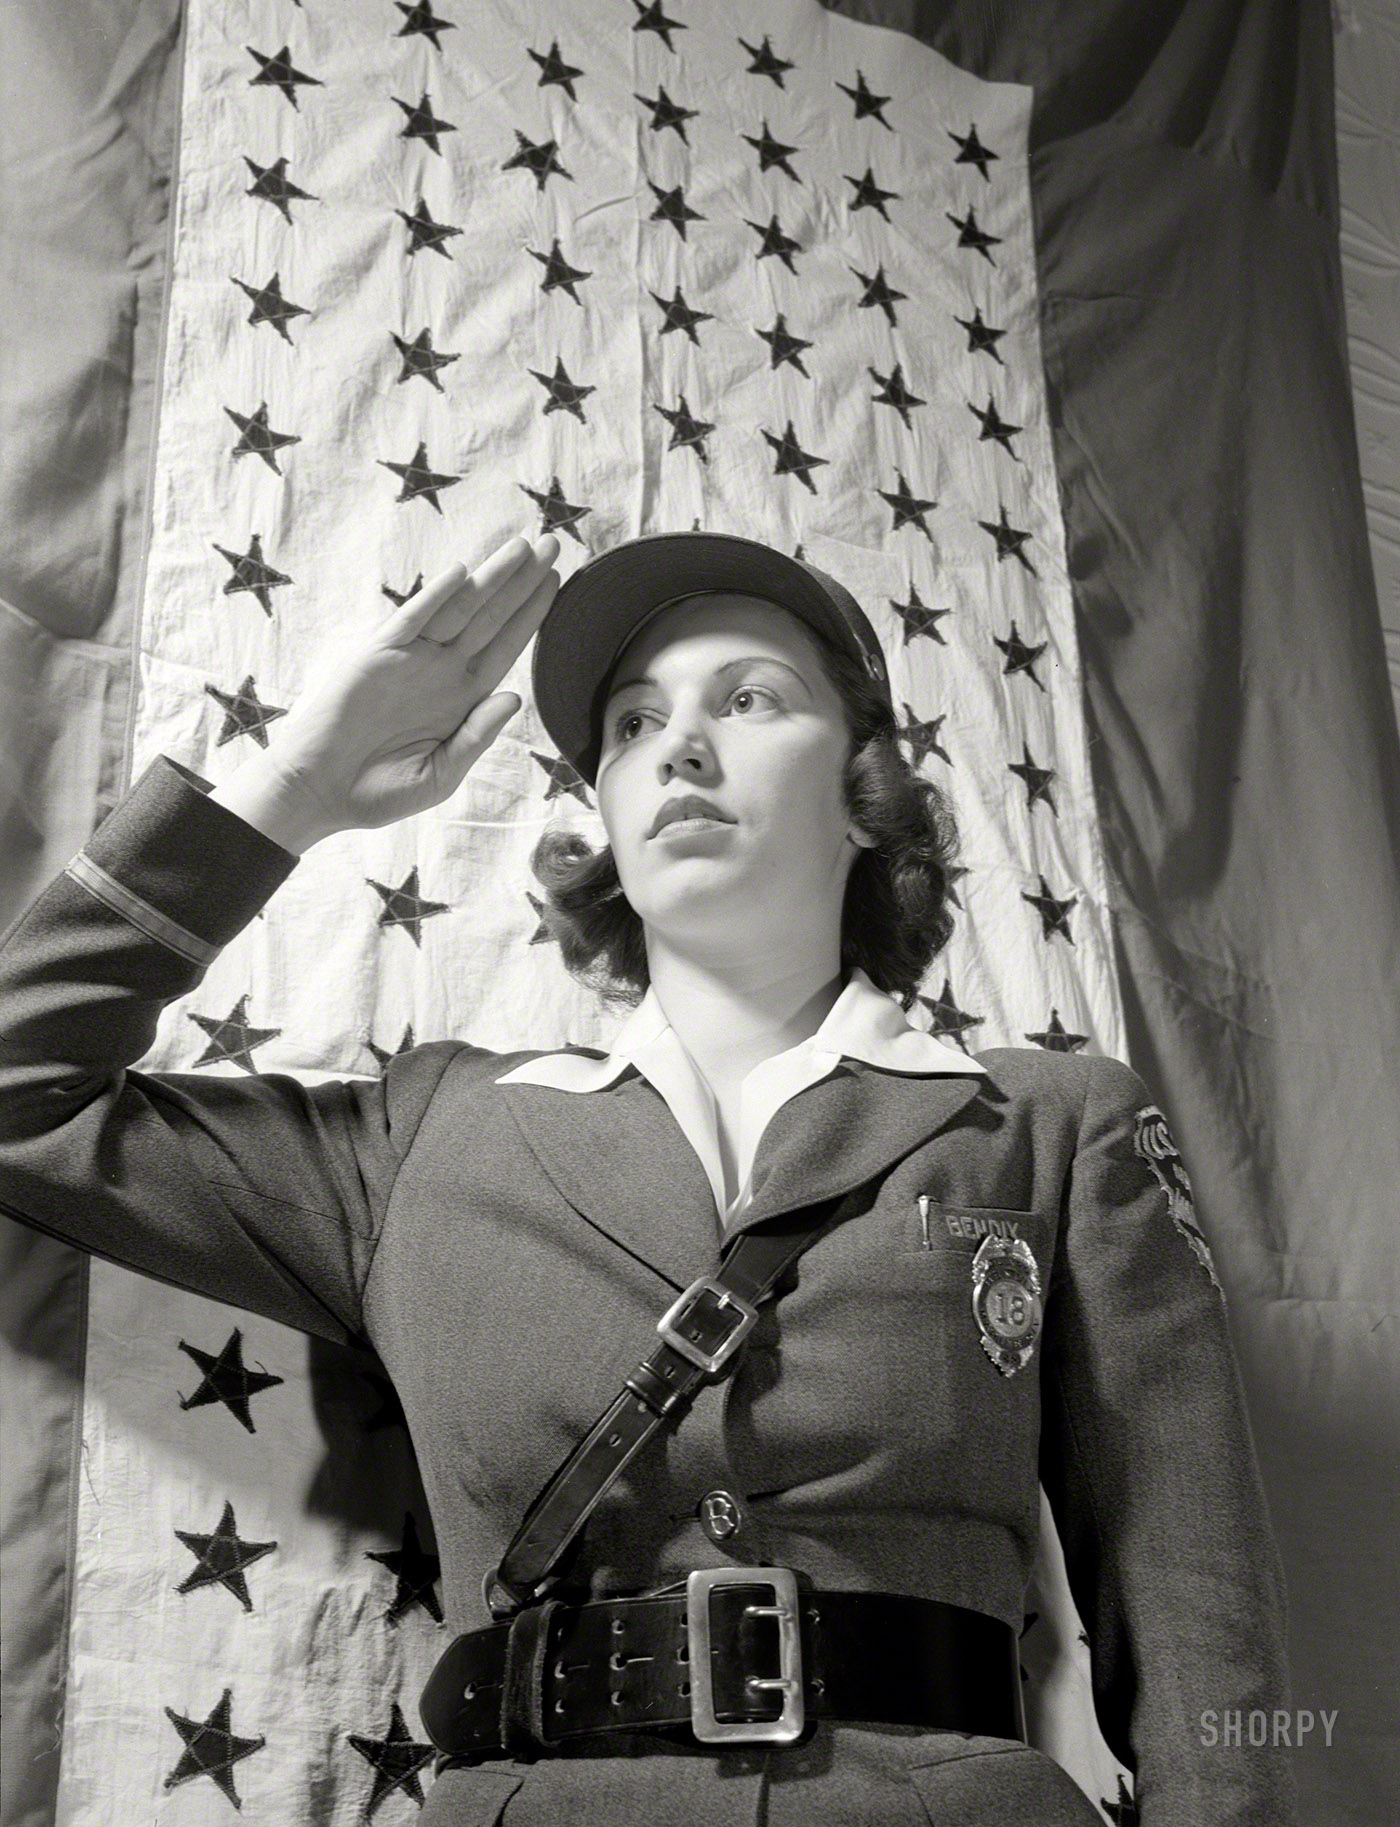 March 1943. "Safe clothes for women war workers. Estelle Hendel, twenty-eight, a guard at the Bendix Aviation Plant in Brooklyn, New York, stands before the company service flag and gives the correct salute." 4x5 inch nitrate negative by Ann Rosener for the Office of War Information. View full size.